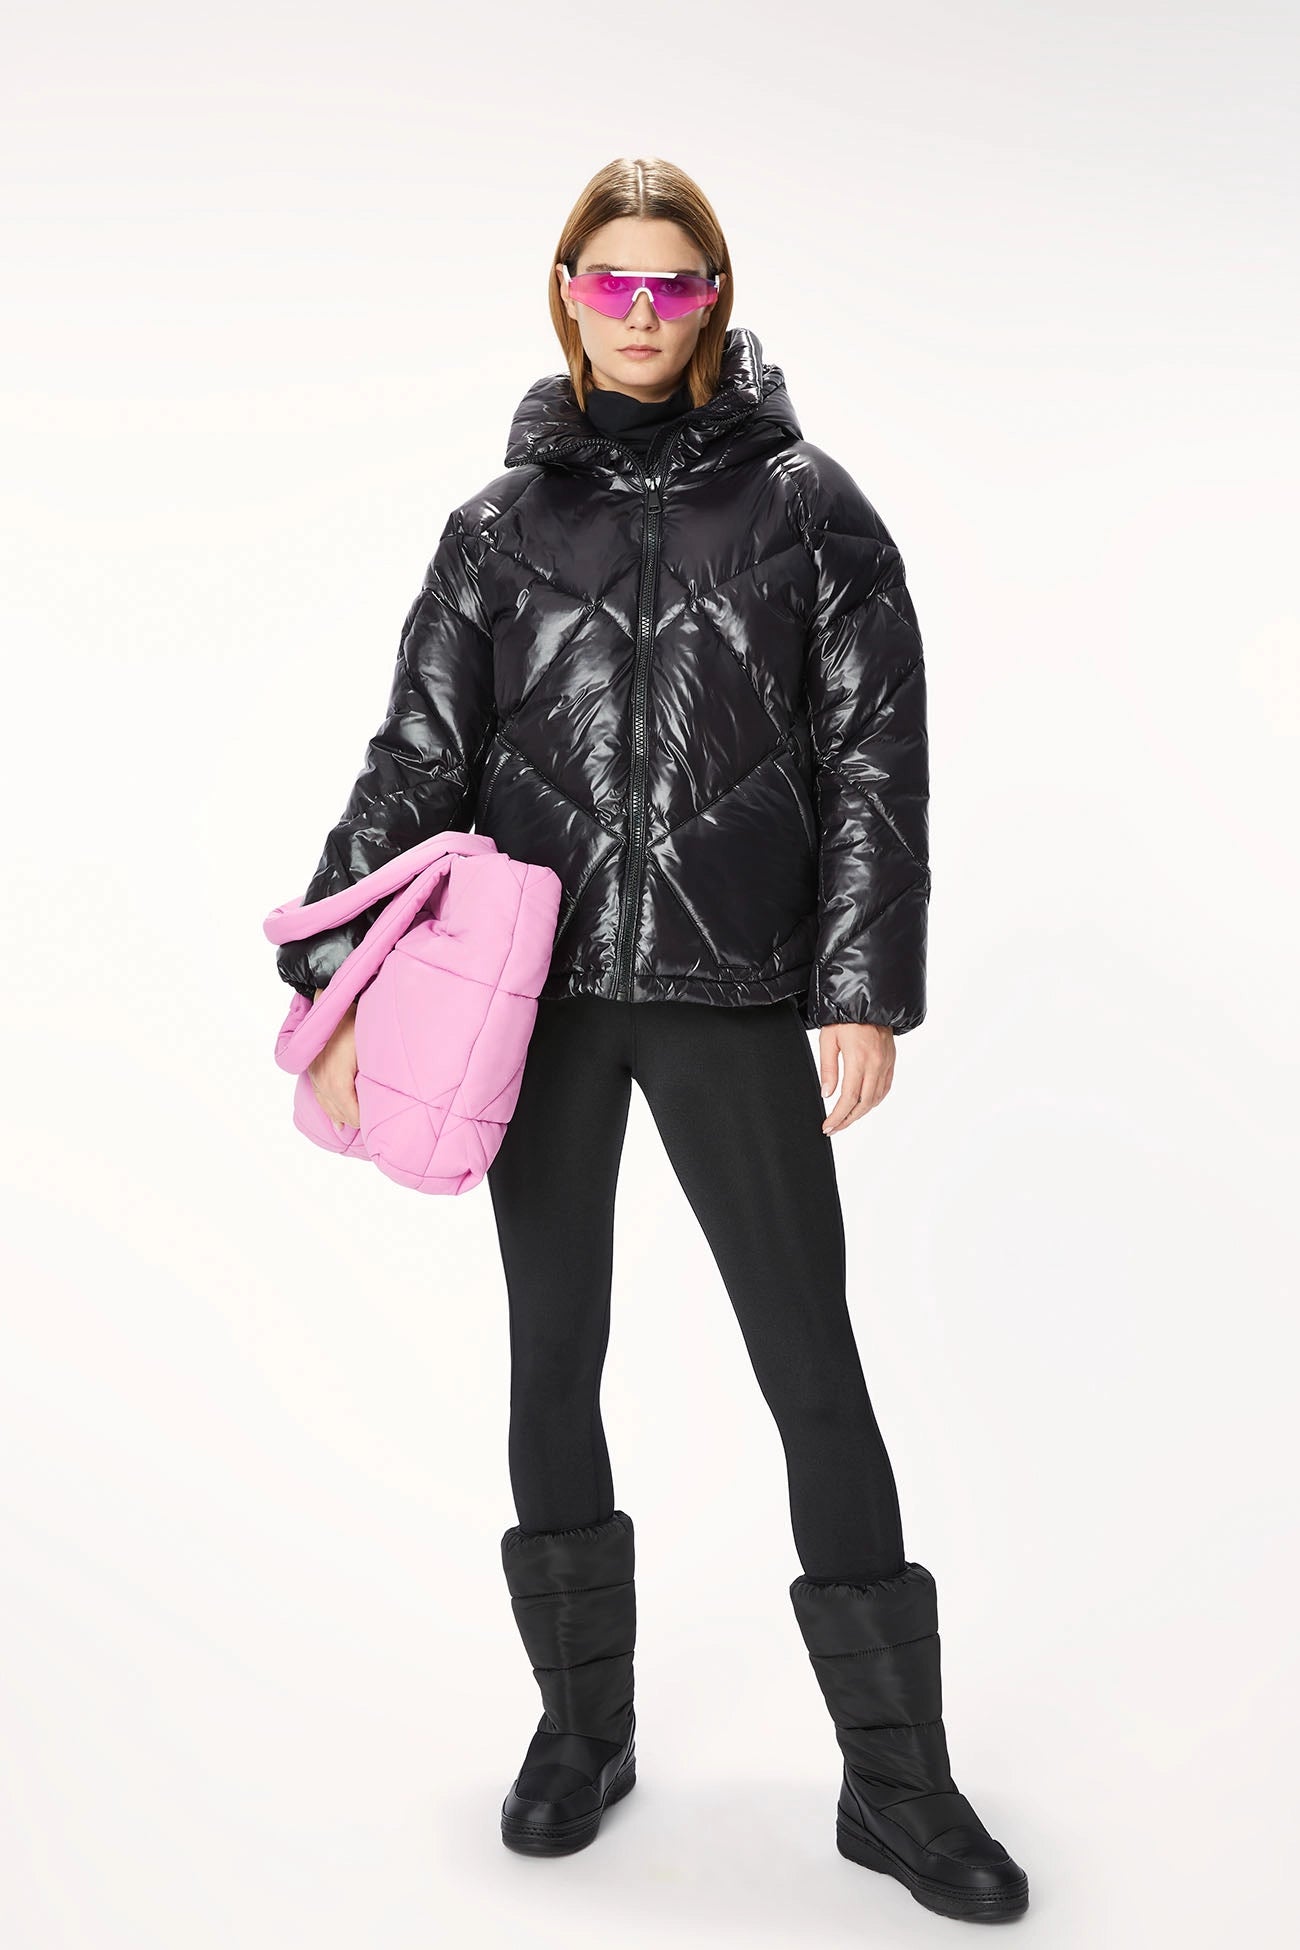 A woman wearing an oversized black OOF puffer jacket with diamond quilting, accessorized with pink sunglasses.